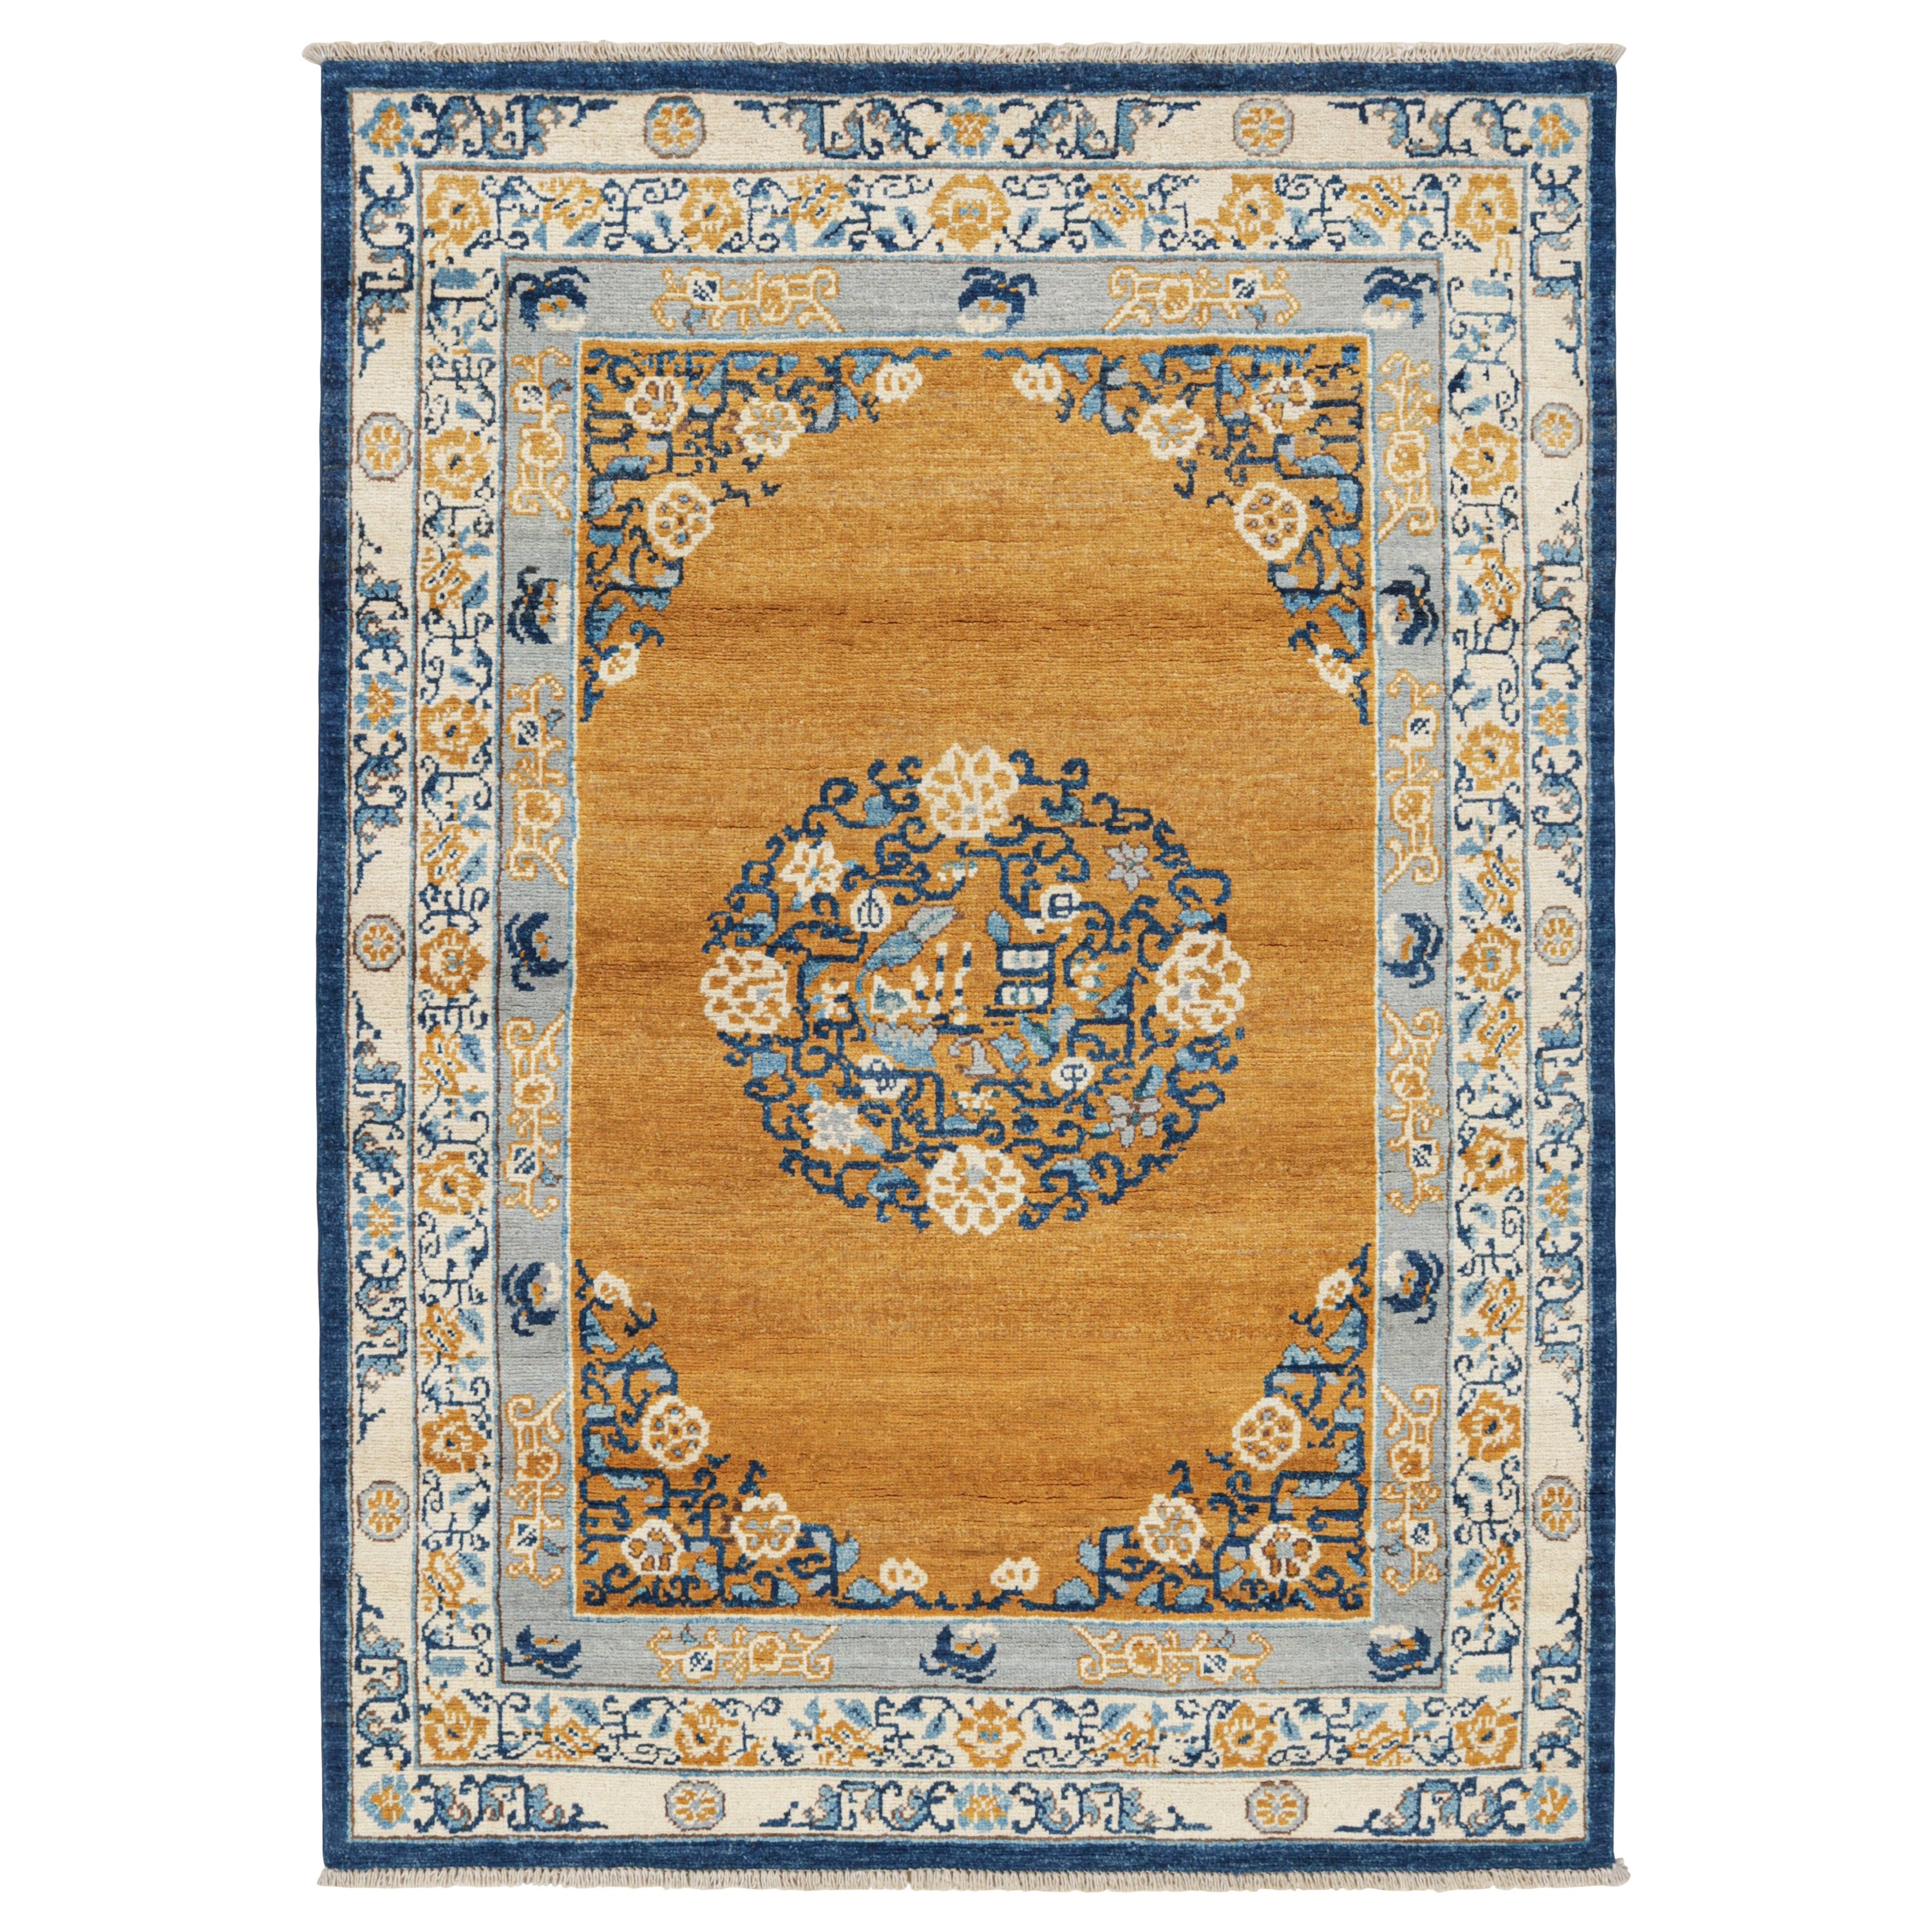 Hand-Knotted Central Asian Rugs